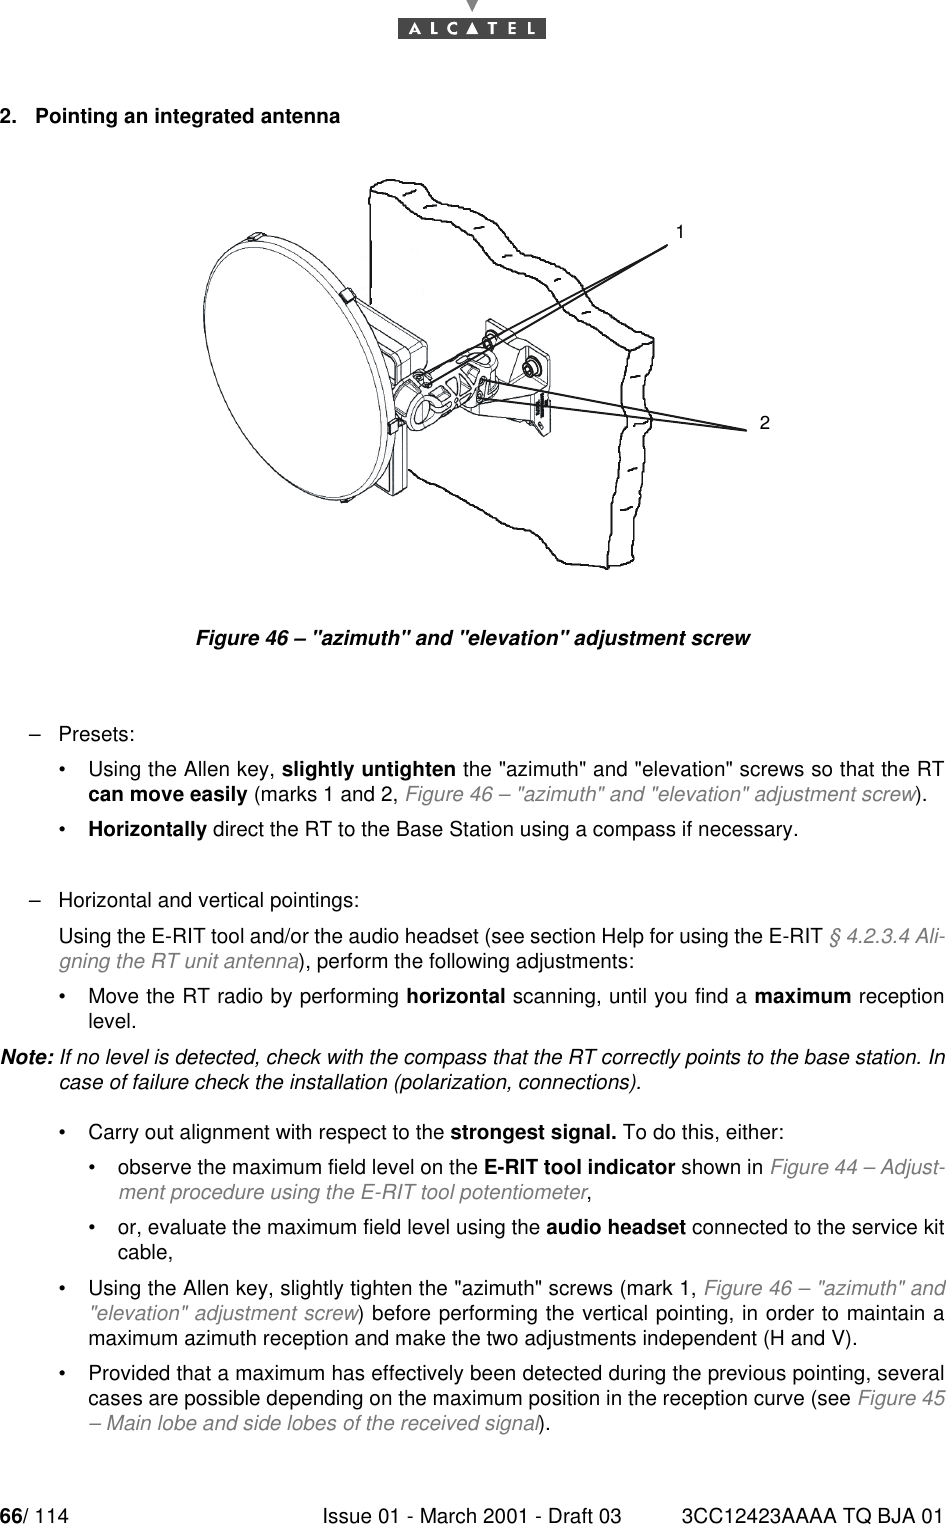 66/ 114 Issue 01 - March 2001 - Draft 03 3CC12423AAAA TQ BJA 01782. Pointing an integrated antennaFigure 46 – &quot;azimuth&quot; and &quot;elevation&quot; adjustment screw–Presets:•Using the Allen key, slightly untighten the &quot;azimuth&quot; and &quot;elevation&quot; screws so that the RTcan move easily (marks 1 and 2, Figure 46 – &quot;azimuth&quot; and &quot;elevation&quot; adjustment screw).•Horizontally direct the RT to the Base Station using a compass if necessary.–Horizontal and vertical pointings:Using the E-RIT tool and/or the audio headset (see section Help for using the E-RIT § 4.2.3.4 Ali-gning the RT unit antenna), perform the following adjustments:•Move the RT radio by performing horizontal scanning, until you find a maximum receptionlevel.Note: If no level is detected, check with the compass that the RT correctly points to the base station. Incase of failure check the installation (polarization, connections).•Carry out alignment with respect to the strongest signal. To do this, either:•observe the maximum field level on the E-RIT tool indicator shown in Figure 44 – Adjust-ment procedure using the E-RIT tool potentiometer,•or, evaluate the maximum field level using the audio headset connected to the service kitcable,•Using the Allen key, slightly tighten the &quot;azimuth&quot; screws (mark 1, Figure 46 – &quot;azimuth&quot; and&quot;elevation&quot; adjustment screw) before performing the vertical pointing, in order to maintain amaximum azimuth reception and make the two adjustments independent (H and V).•Provided that a maximum has effectively been detected during the previous pointing, severalcases are possible depending on the maximum position in the reception curve (see Figure 45– Main lobe and side lobes of the received signal).12